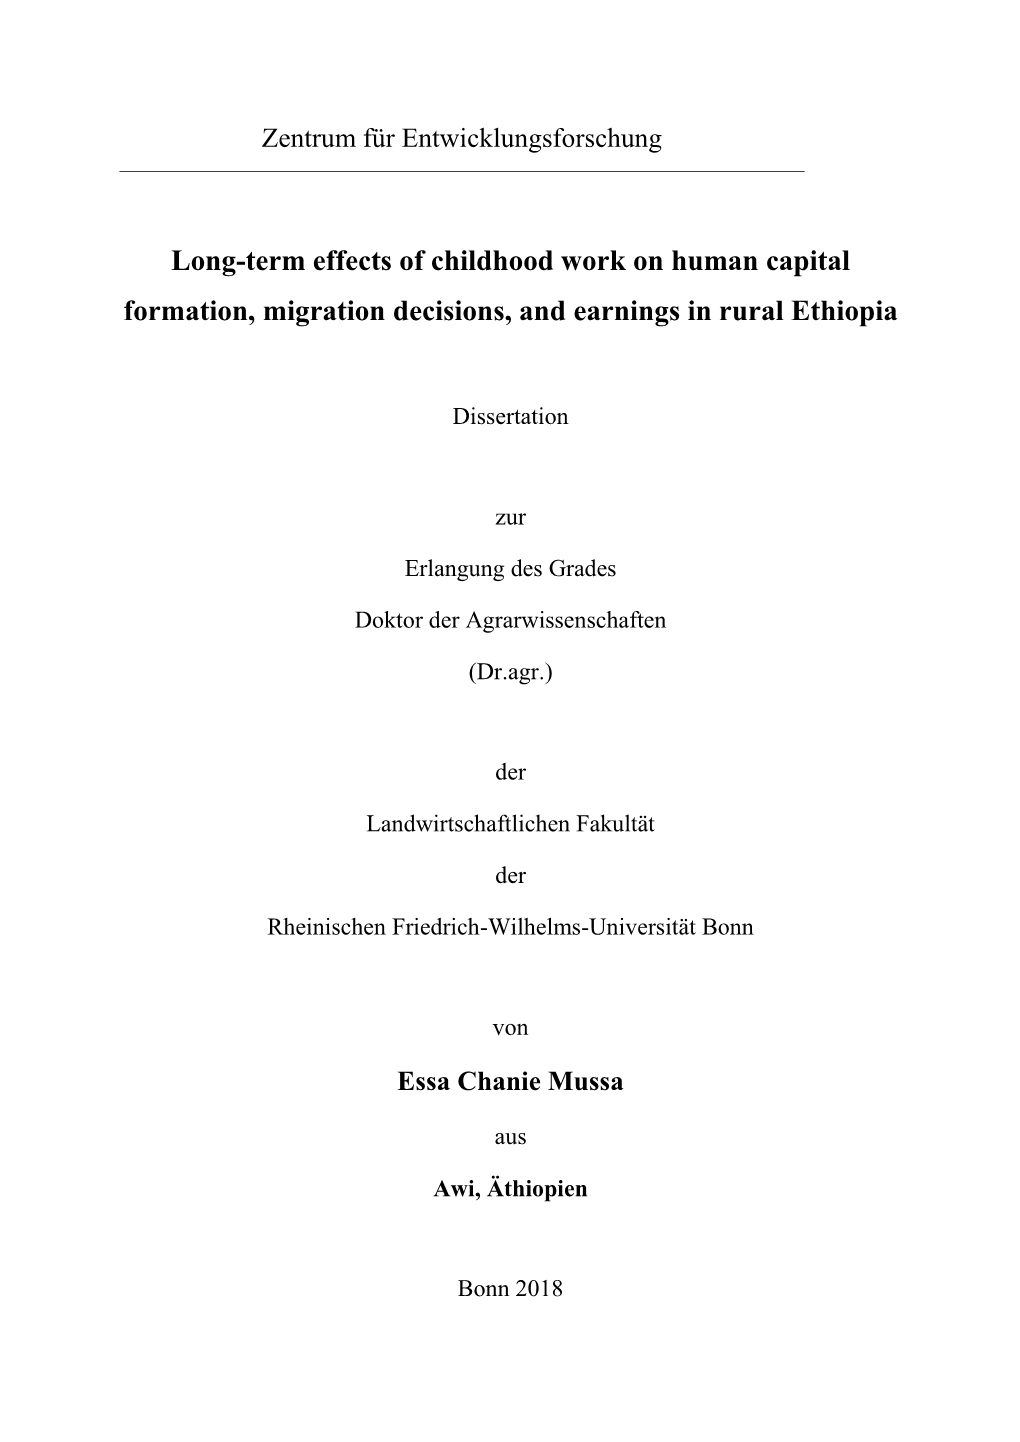 Long-Term Effects of Childhood Work on Human Capital Formation, Migration Decisions, and Earnings in Rural Ethiopia